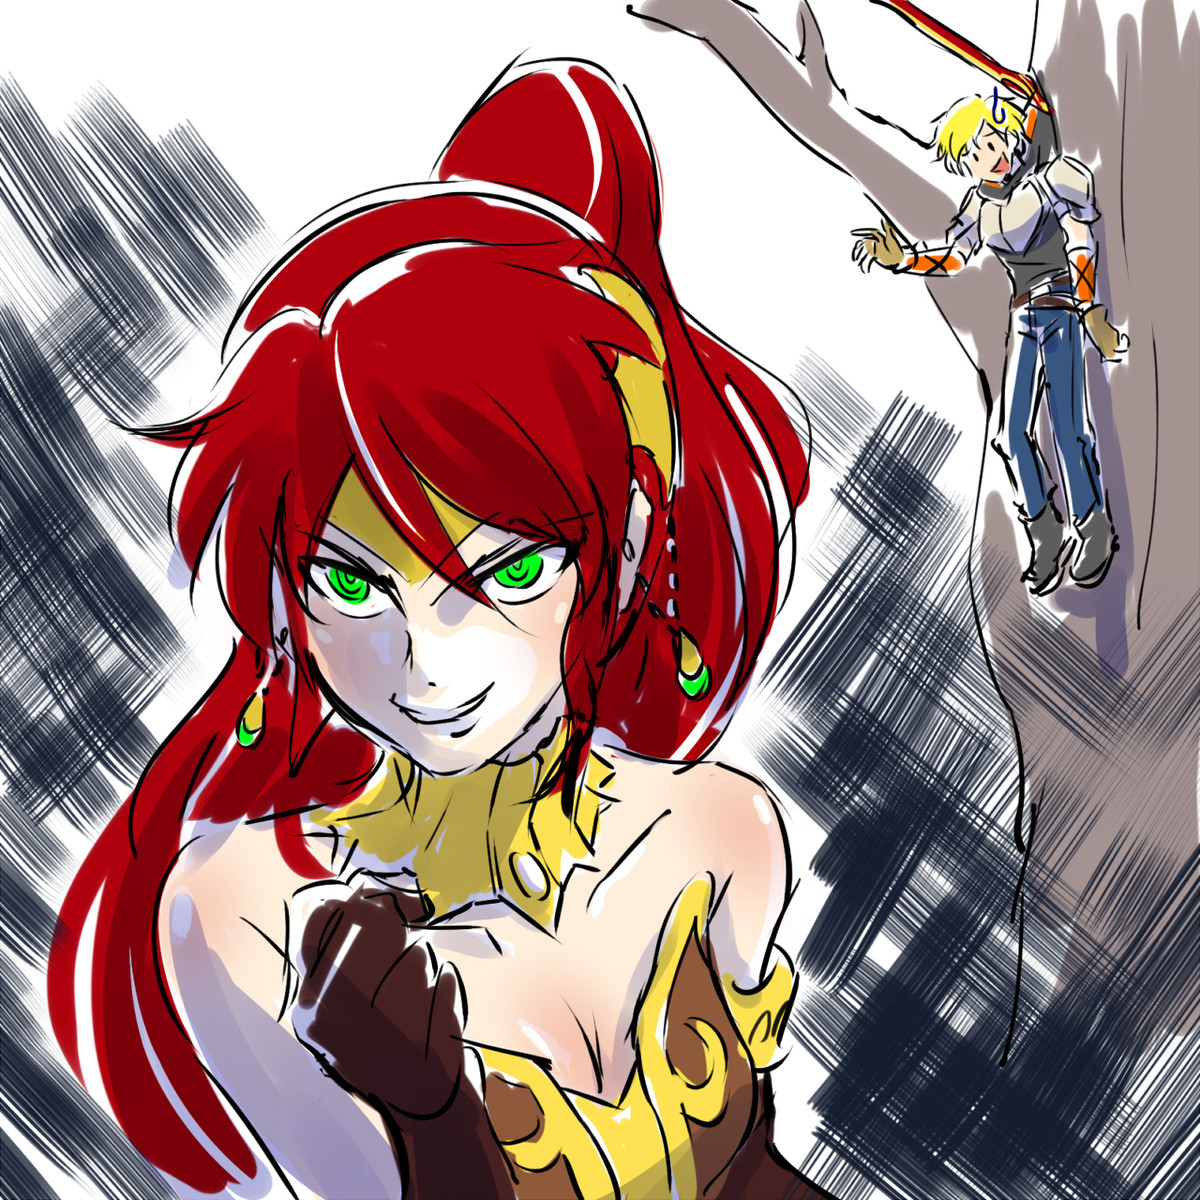 Gives me the perfect chance to post my Pyrrha lewds too. 